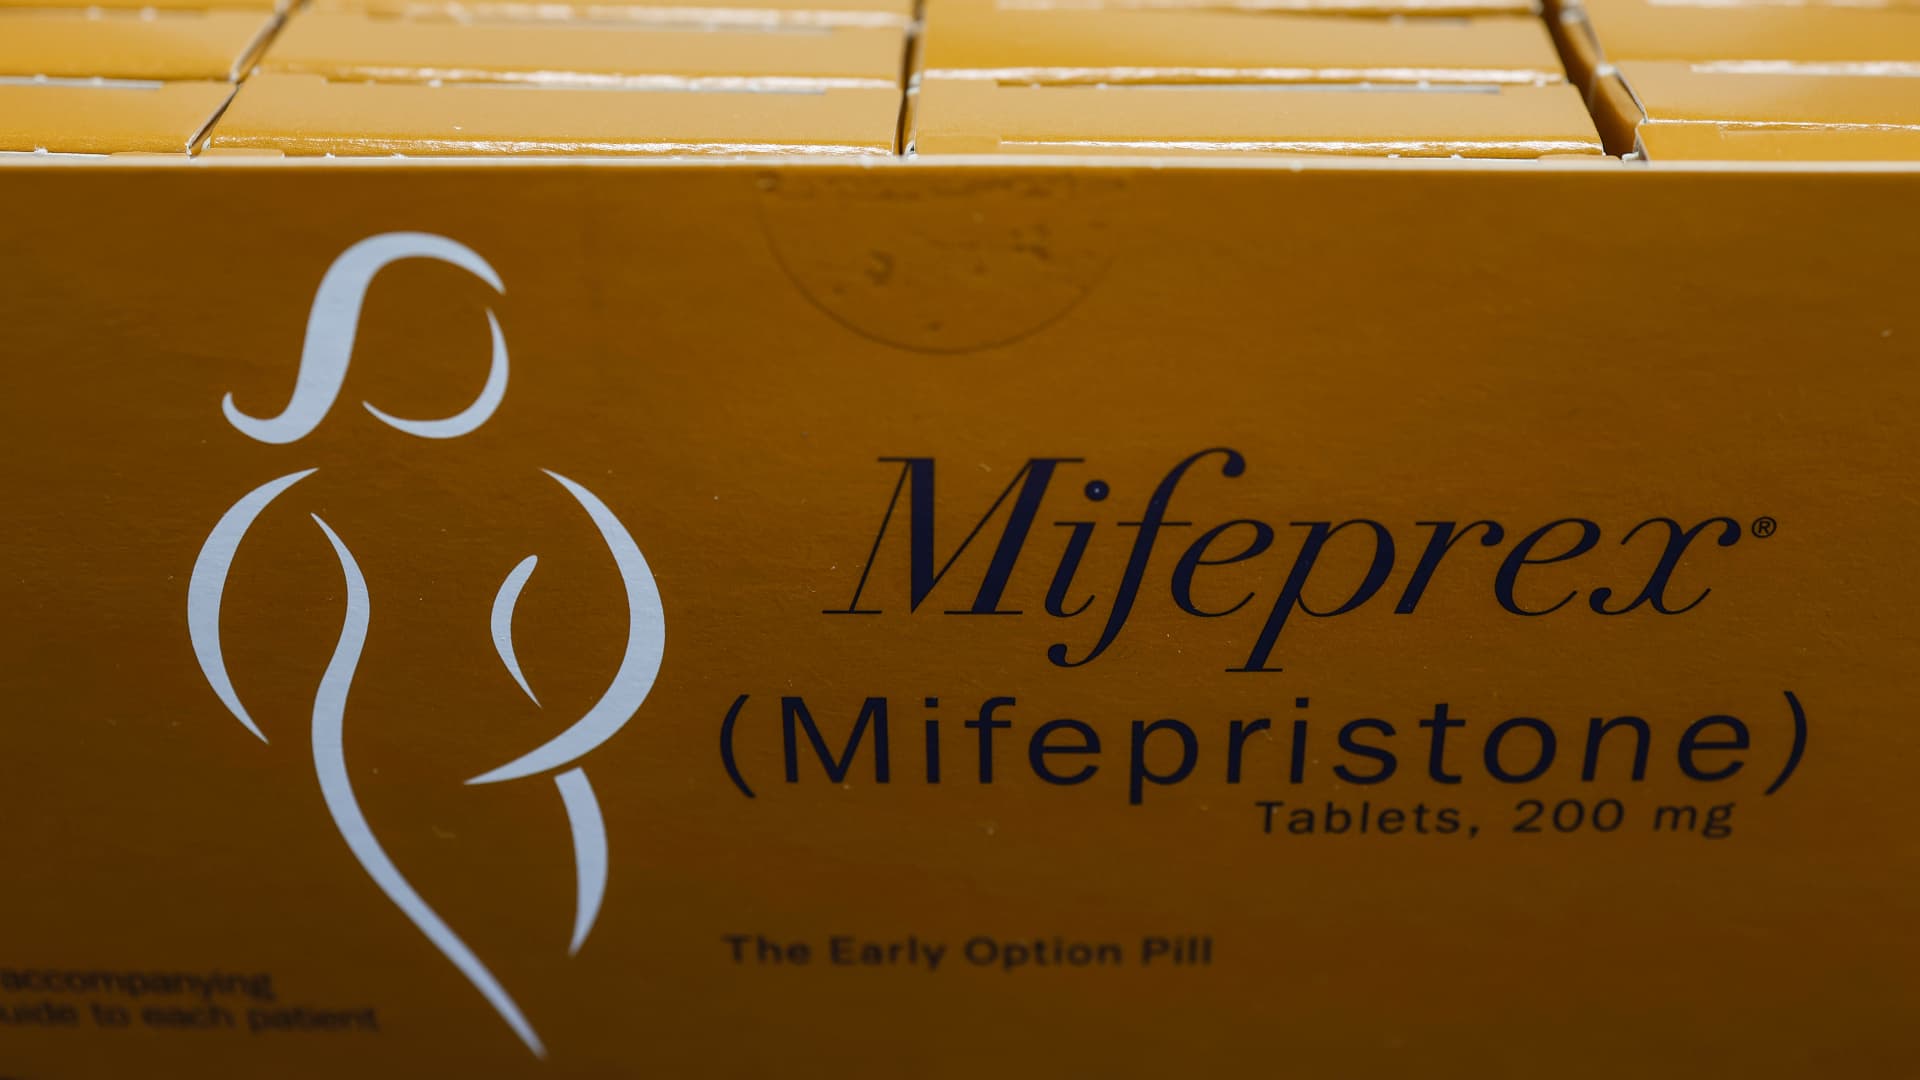 Abortion capsule mifepristone is banned or restricted in some states despite Supreme Court ruling